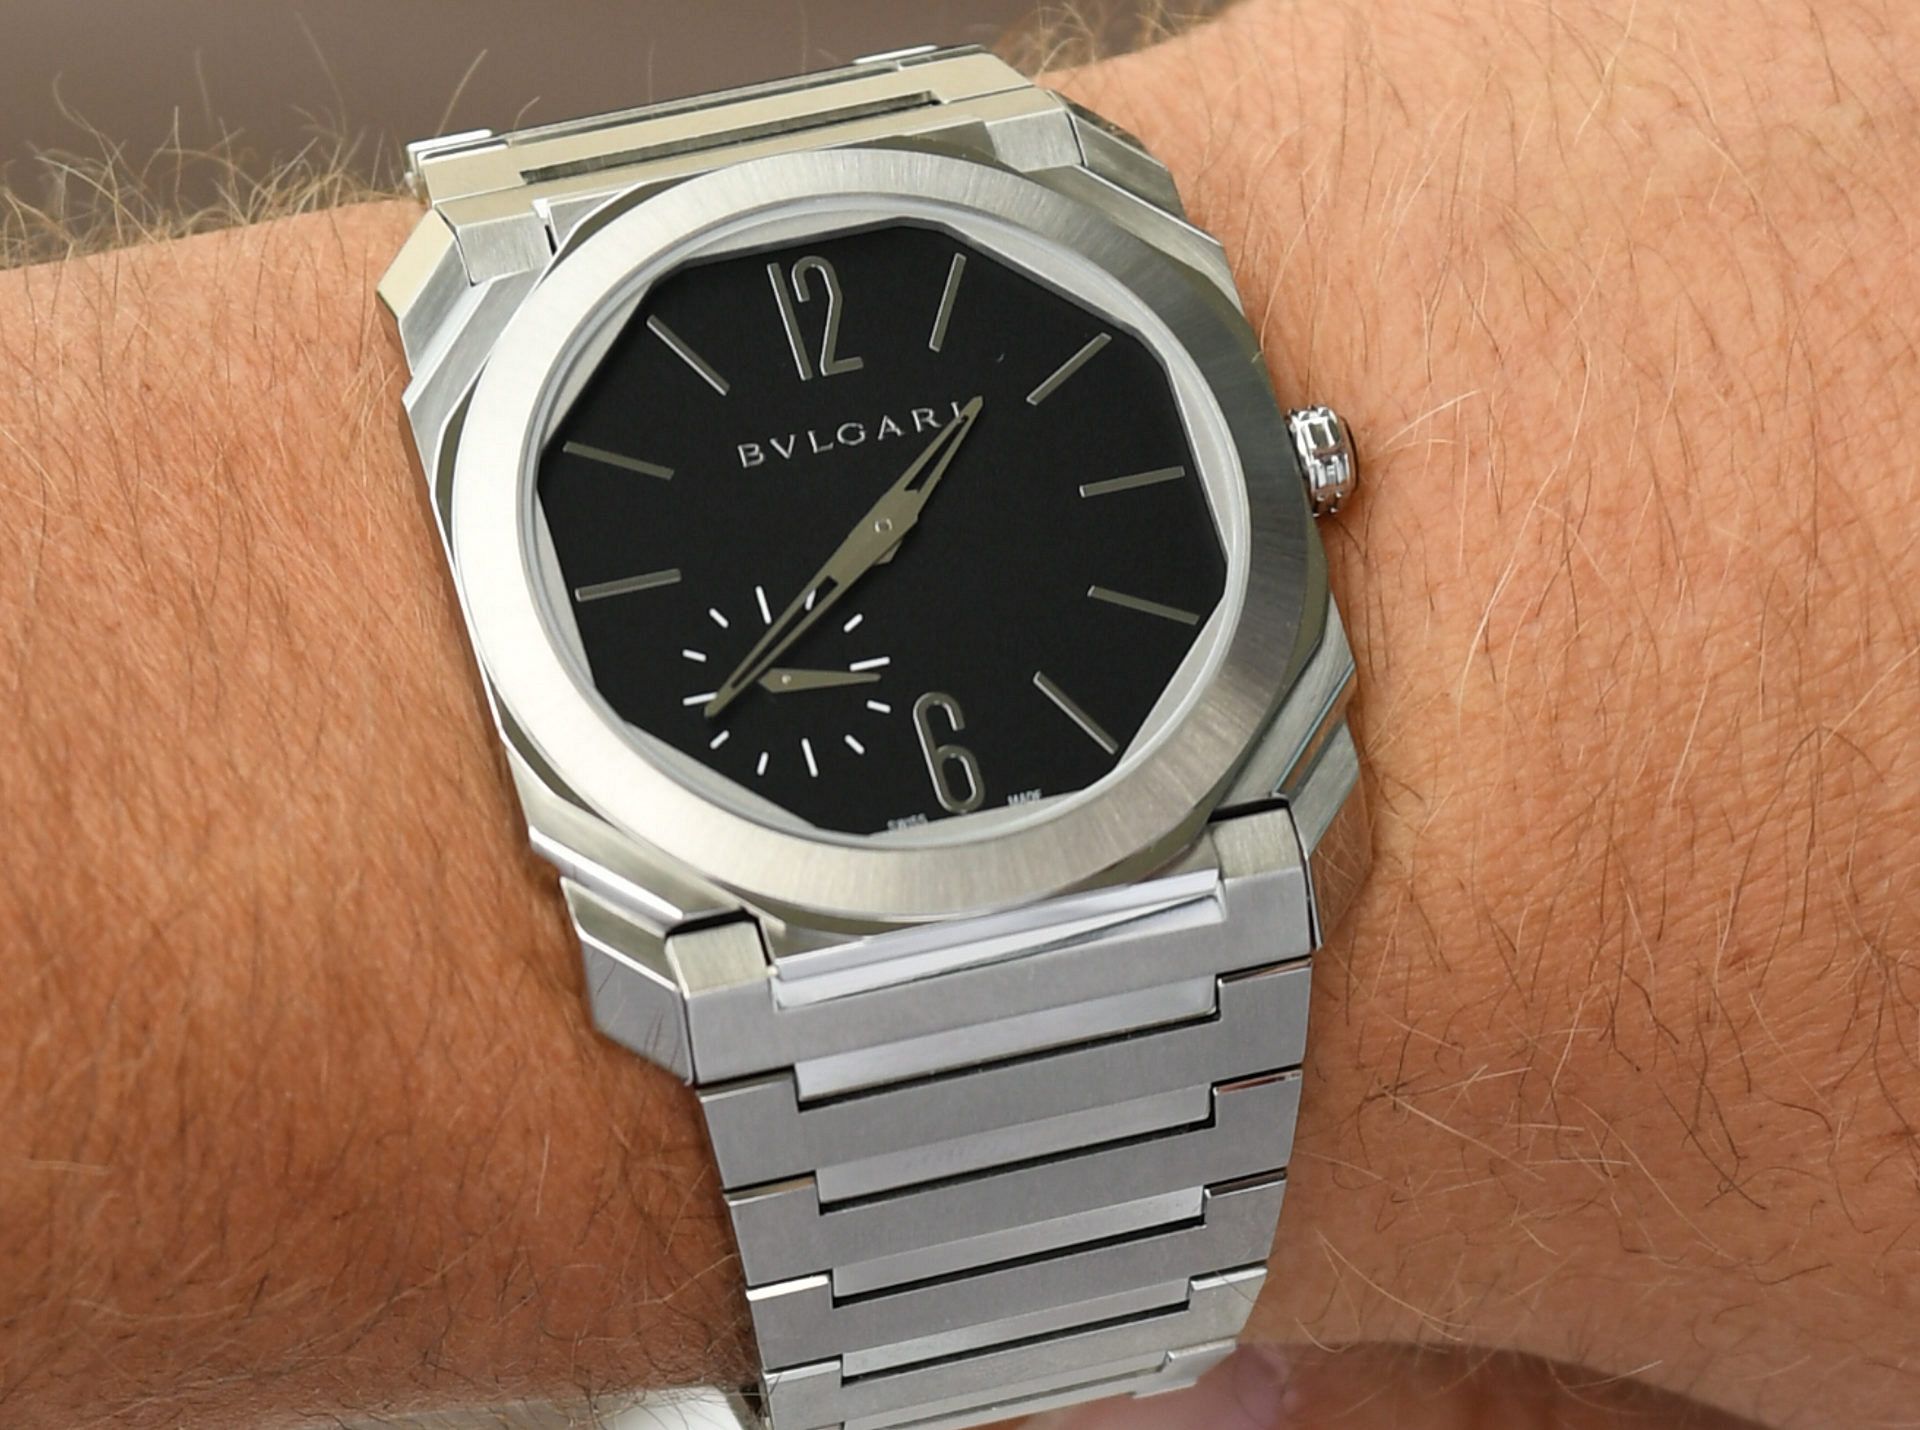 HANDS-ON: The Bulgari Octo Finissimo in satin-polished steel